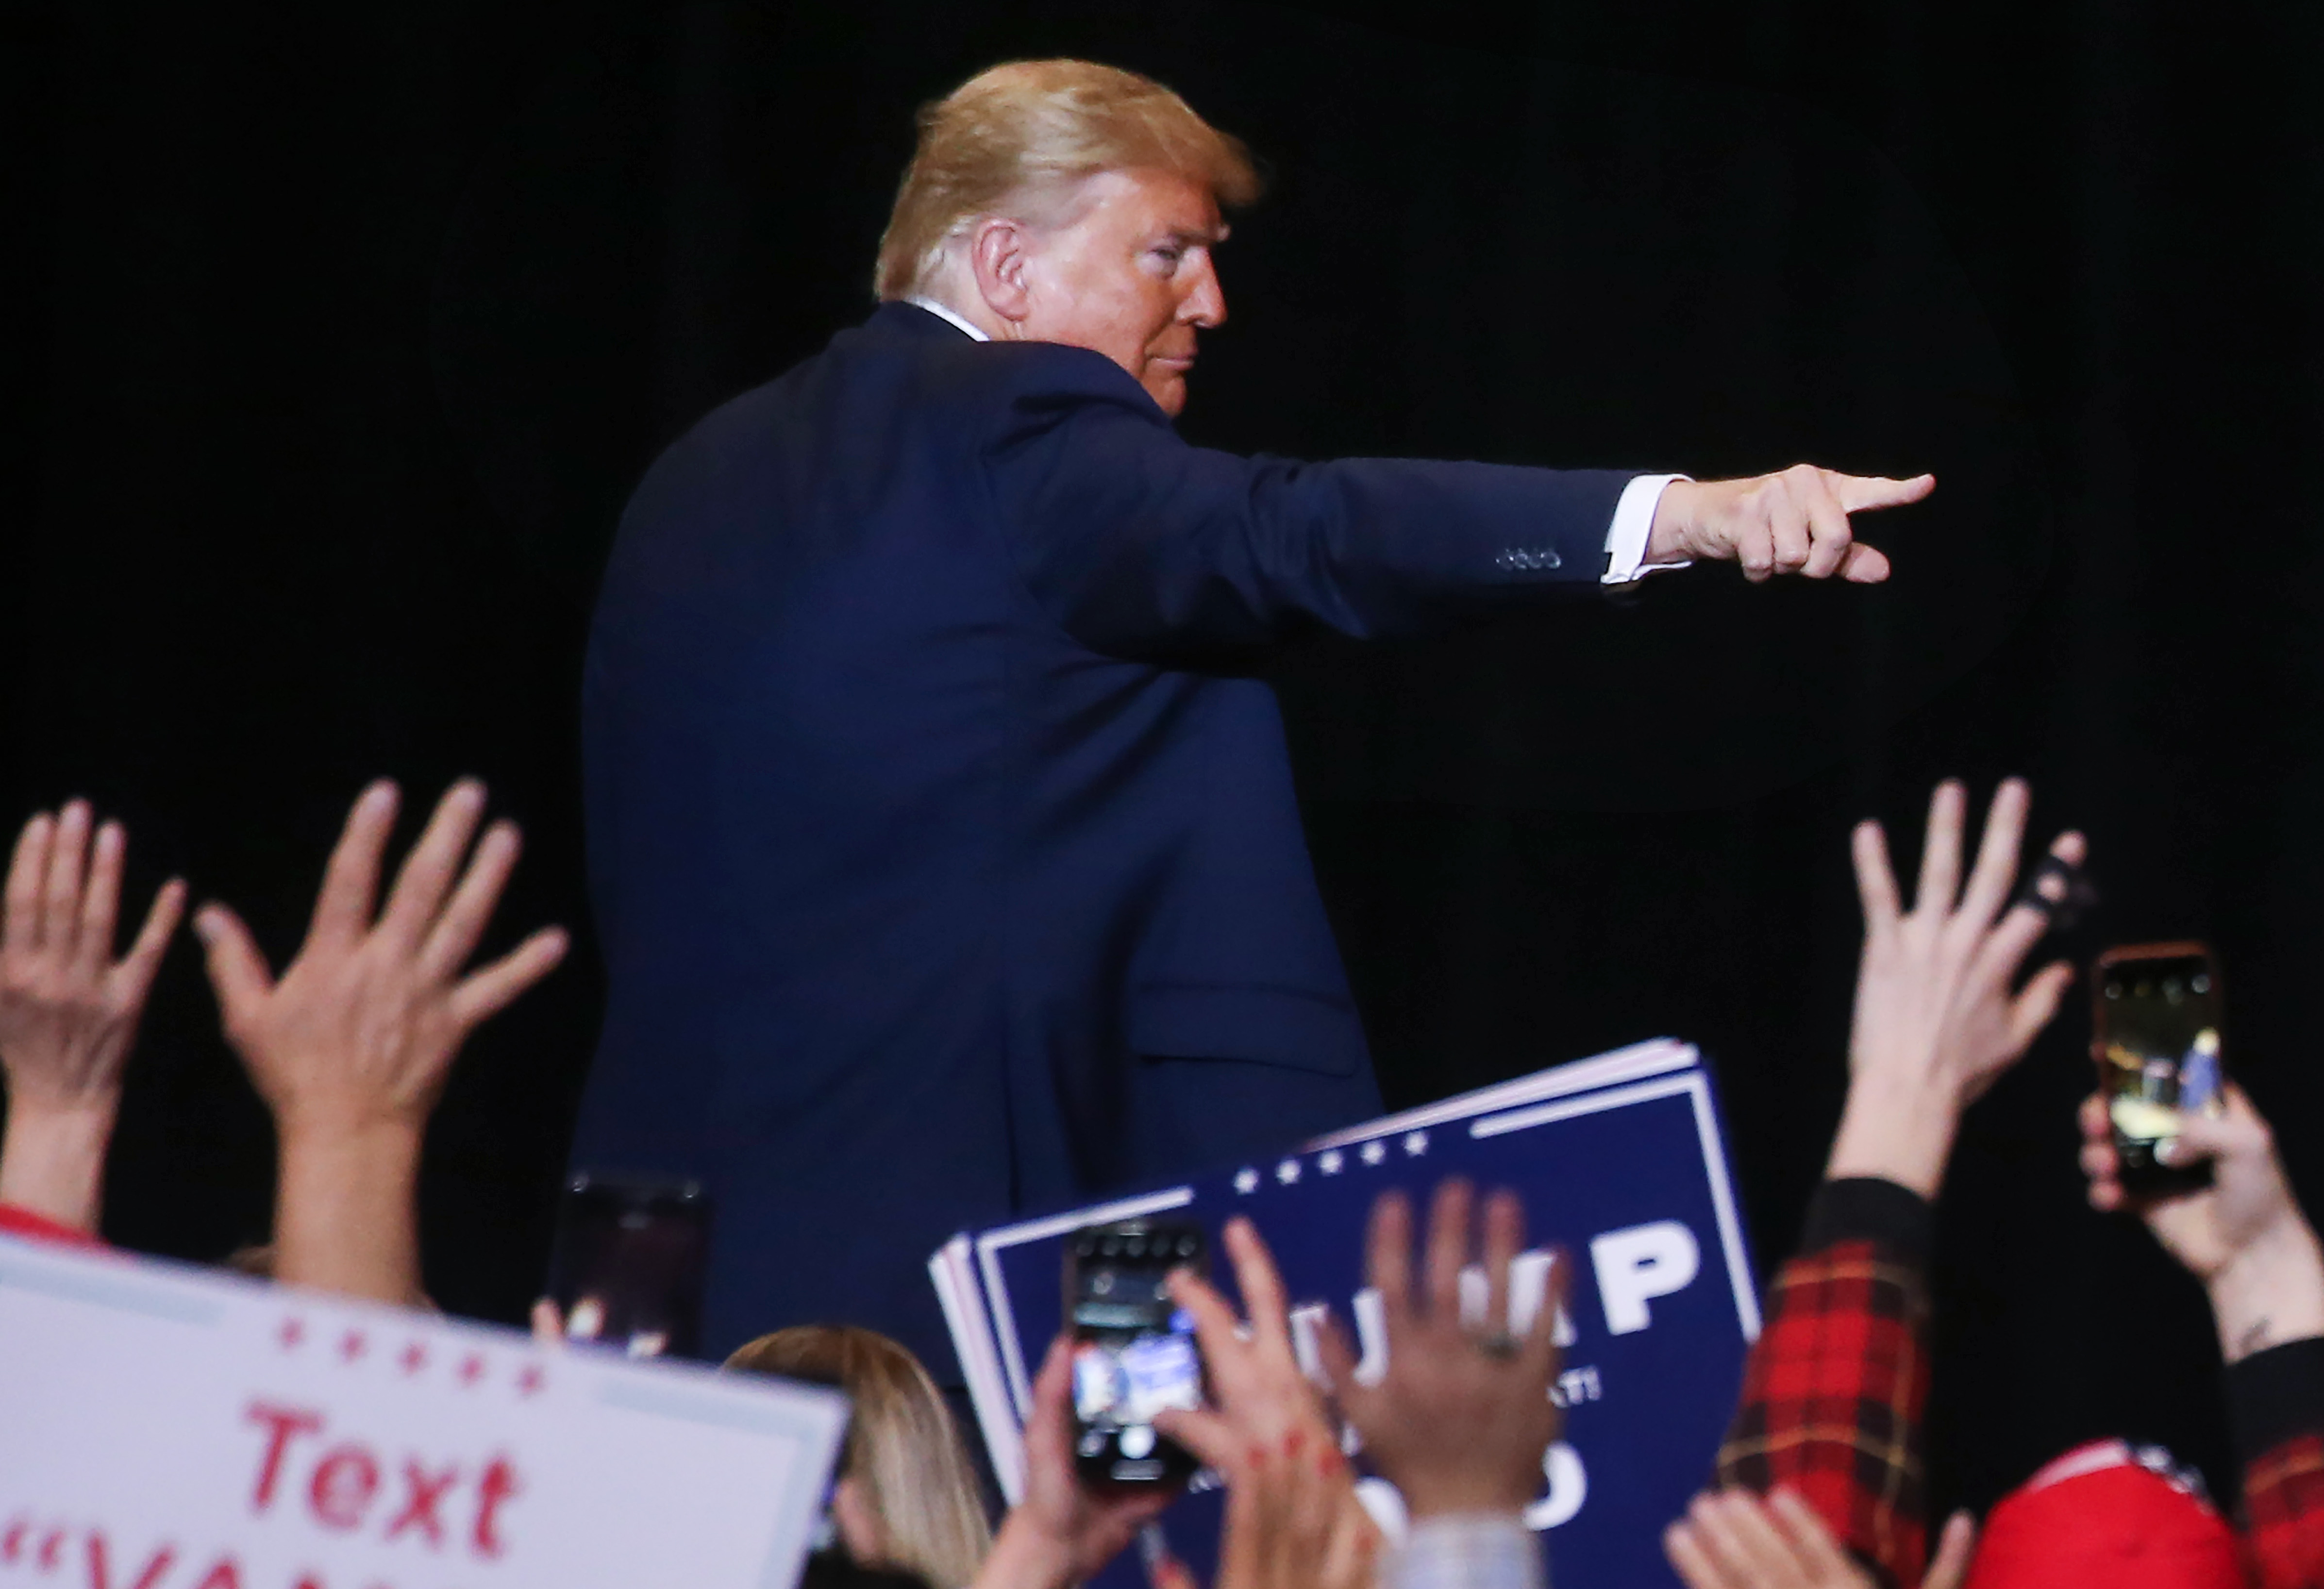 LAS VEGAS, NEVADA - FEBRUARY 21: President Donald Trump points to the crowd as he departs a campaign rally at Las Vegas Convention Center on February 21, 2020 in Las Vegas, Nevada. The upcoming Nevada Democratic presidential caucus will be held February 22. (Photo by Mario Tama/Getty Images)